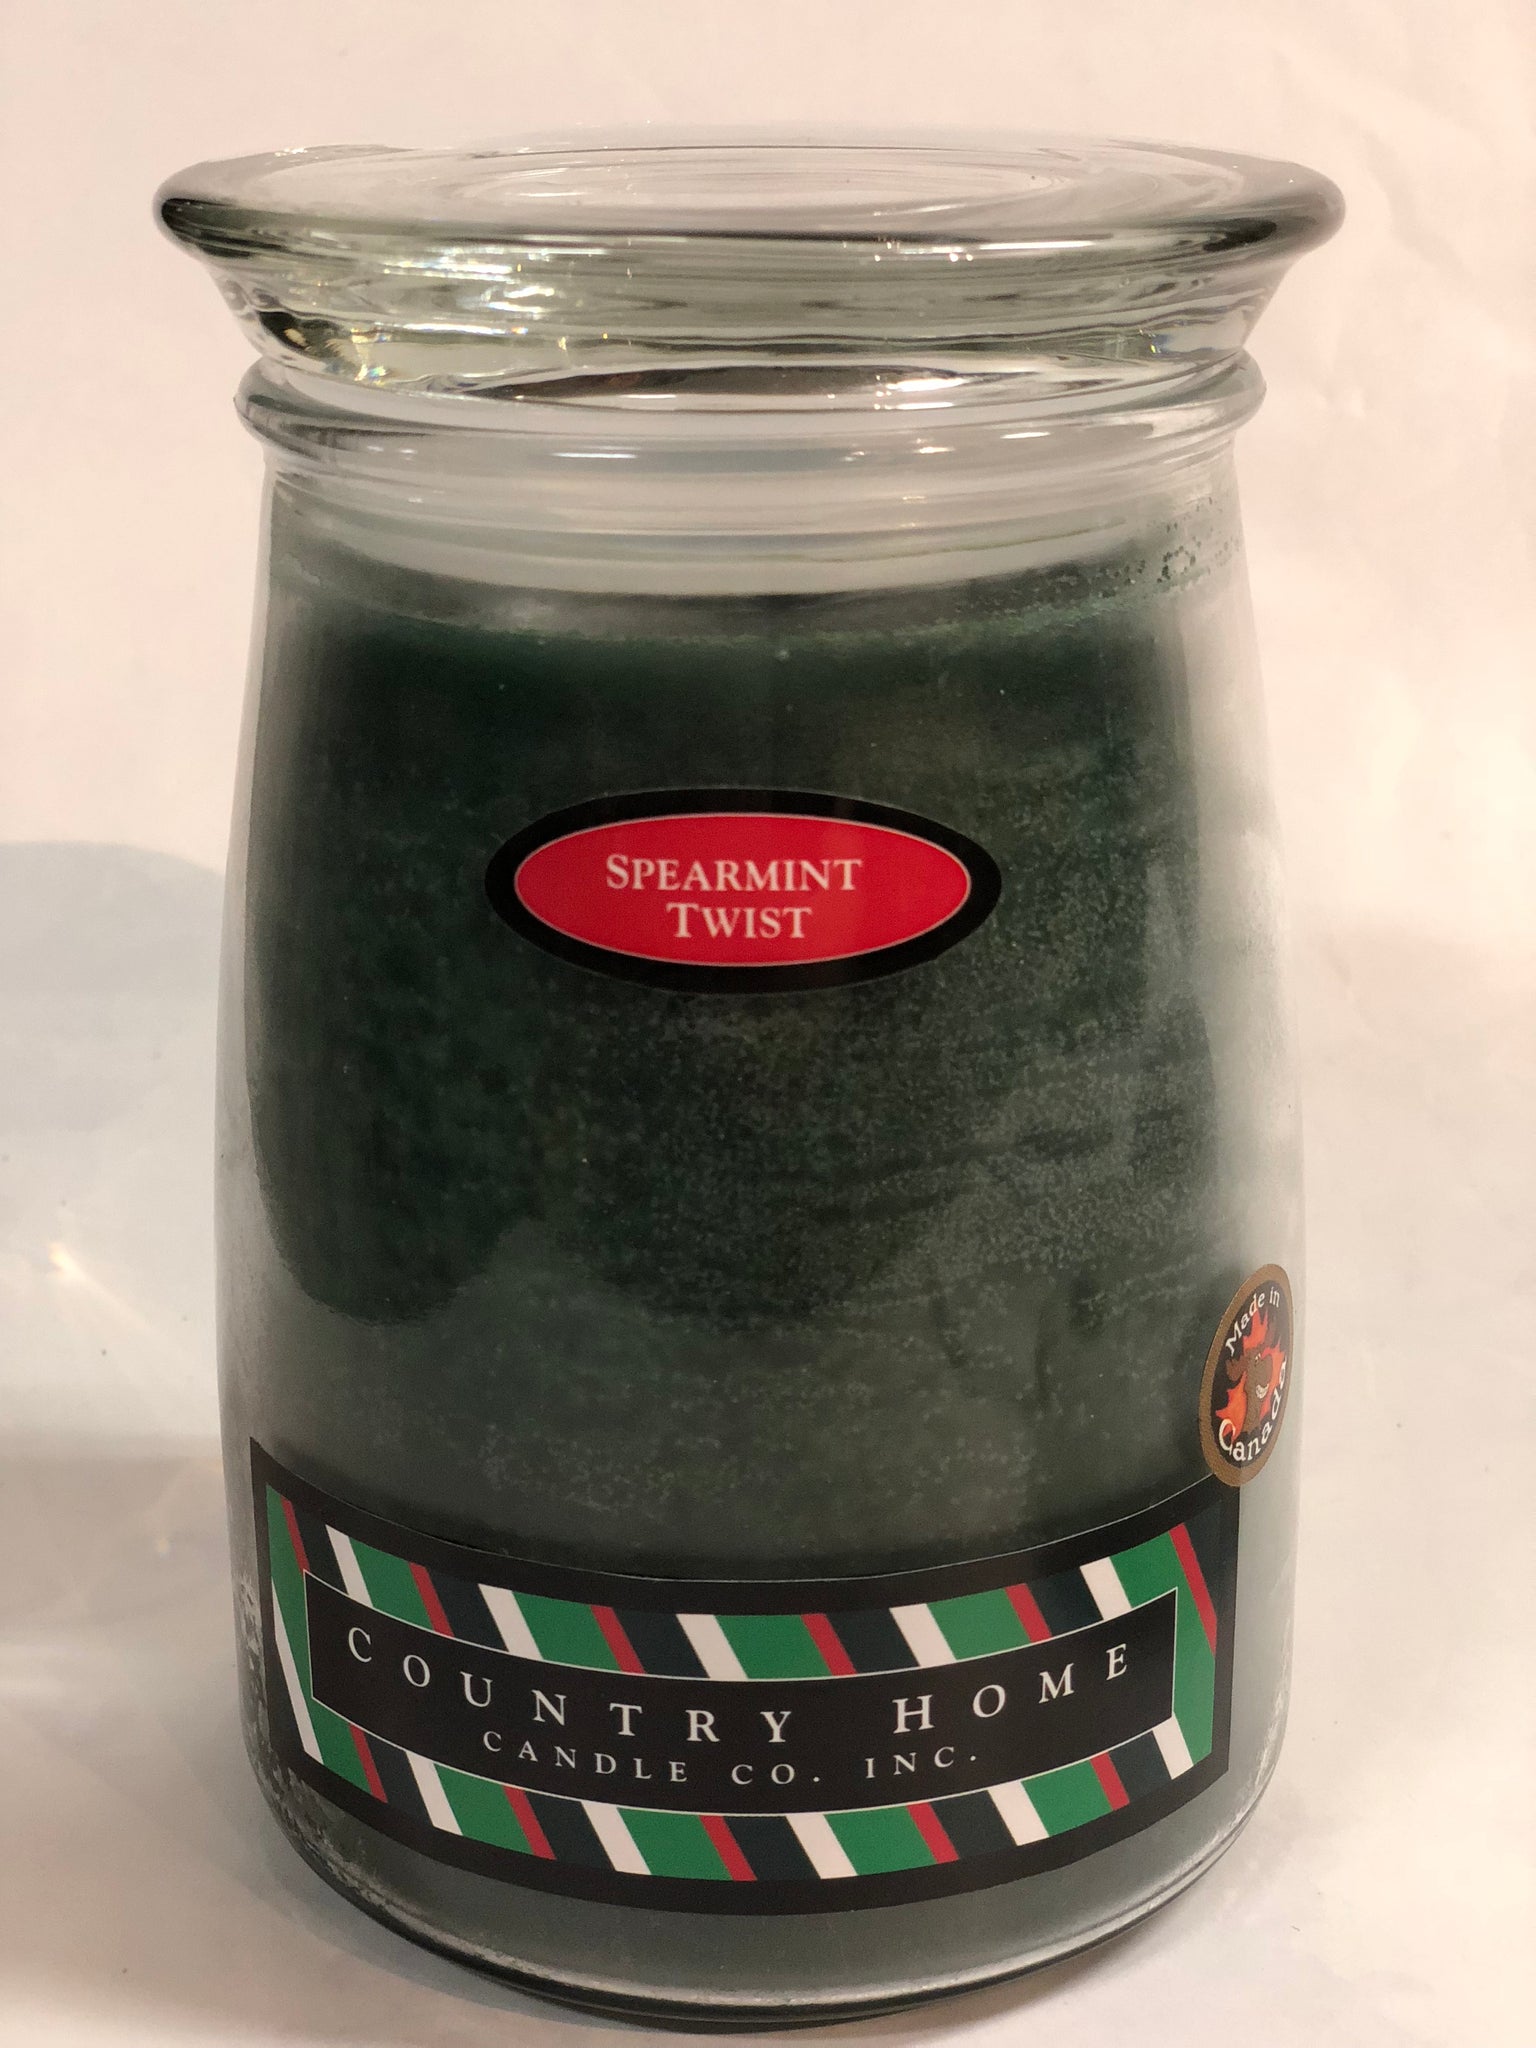 Country Home Jar Candle - Spearmint Twist